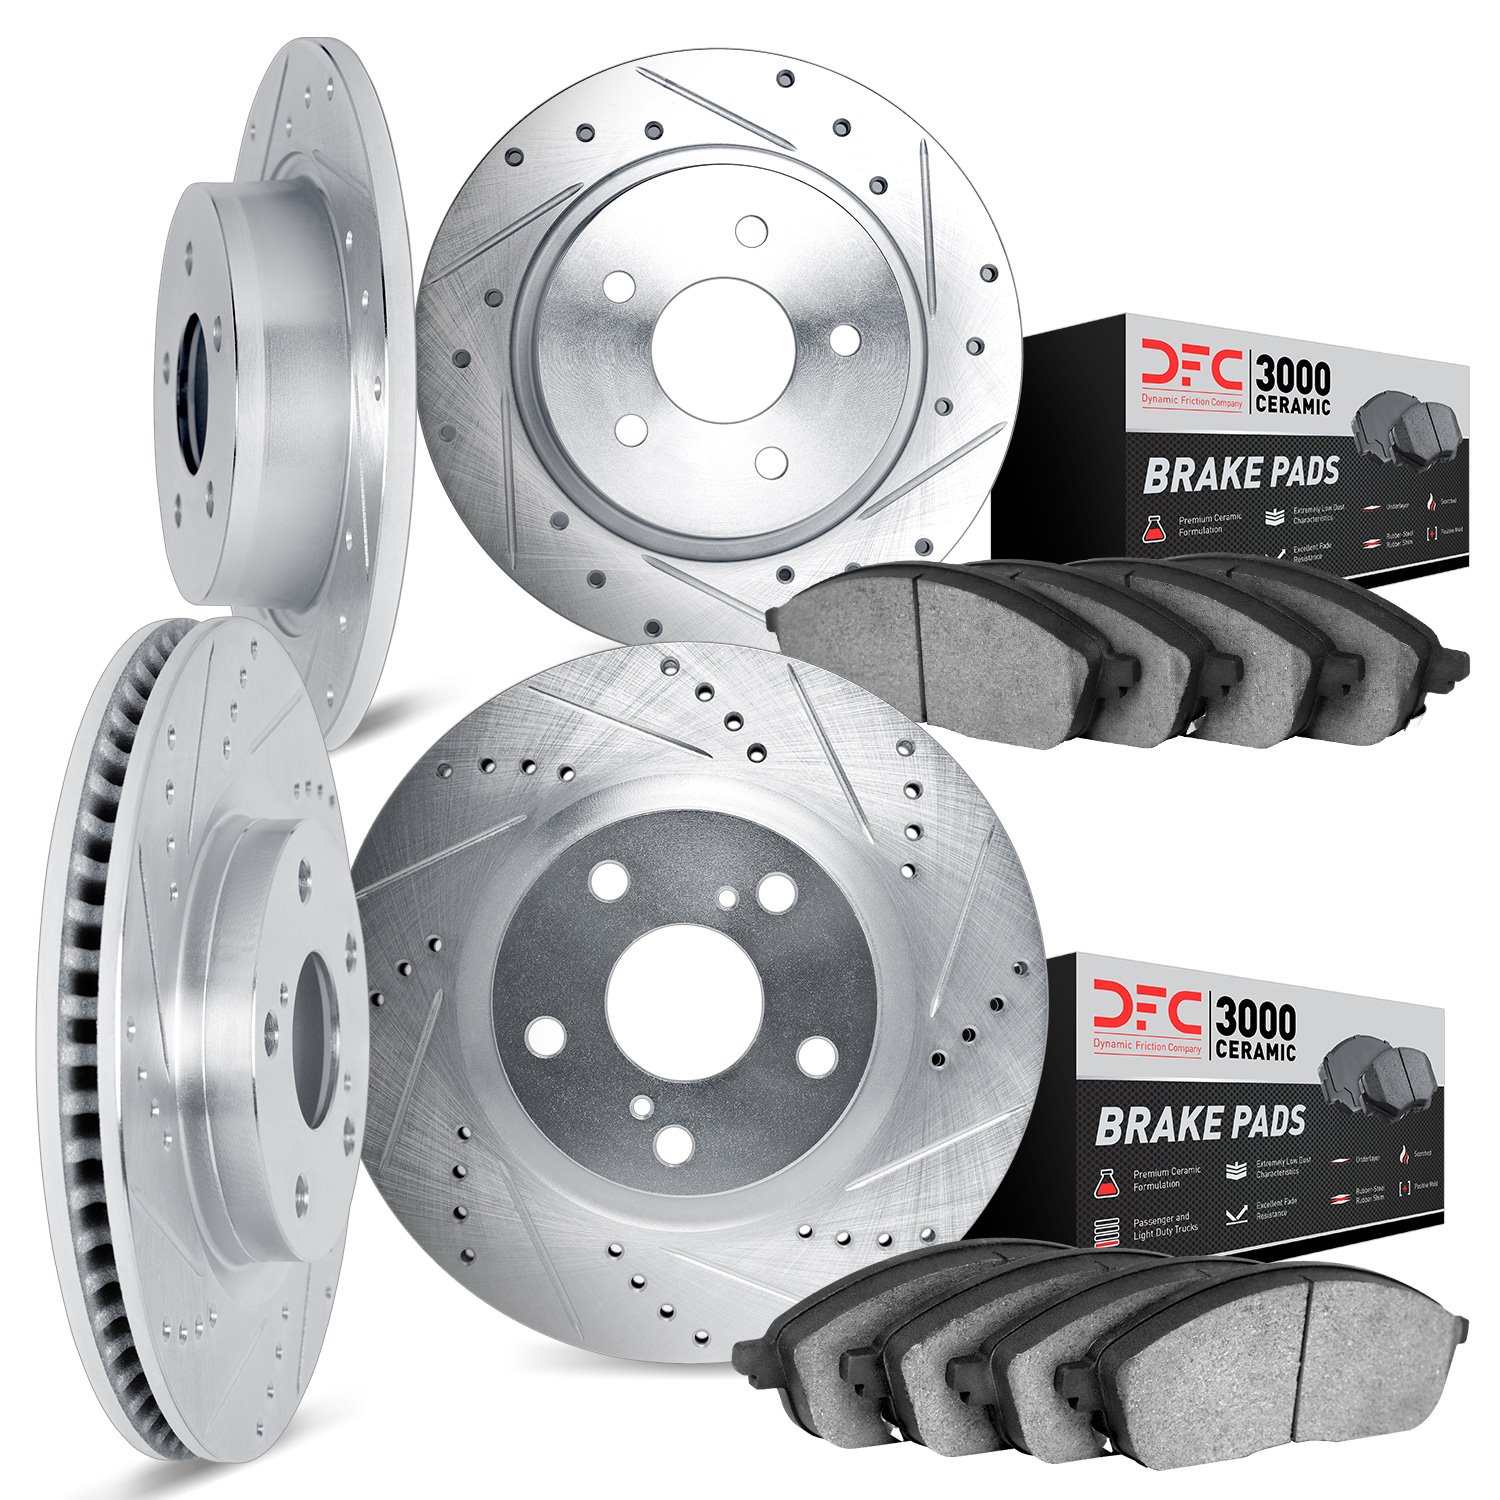 7304-54082 Drilled/Slotted Brake Rotor with 3000-Series Ceramic Brake Pads Kit [Silver], 2006-2010 Ford/Lincoln/Mercury/Mazda, P